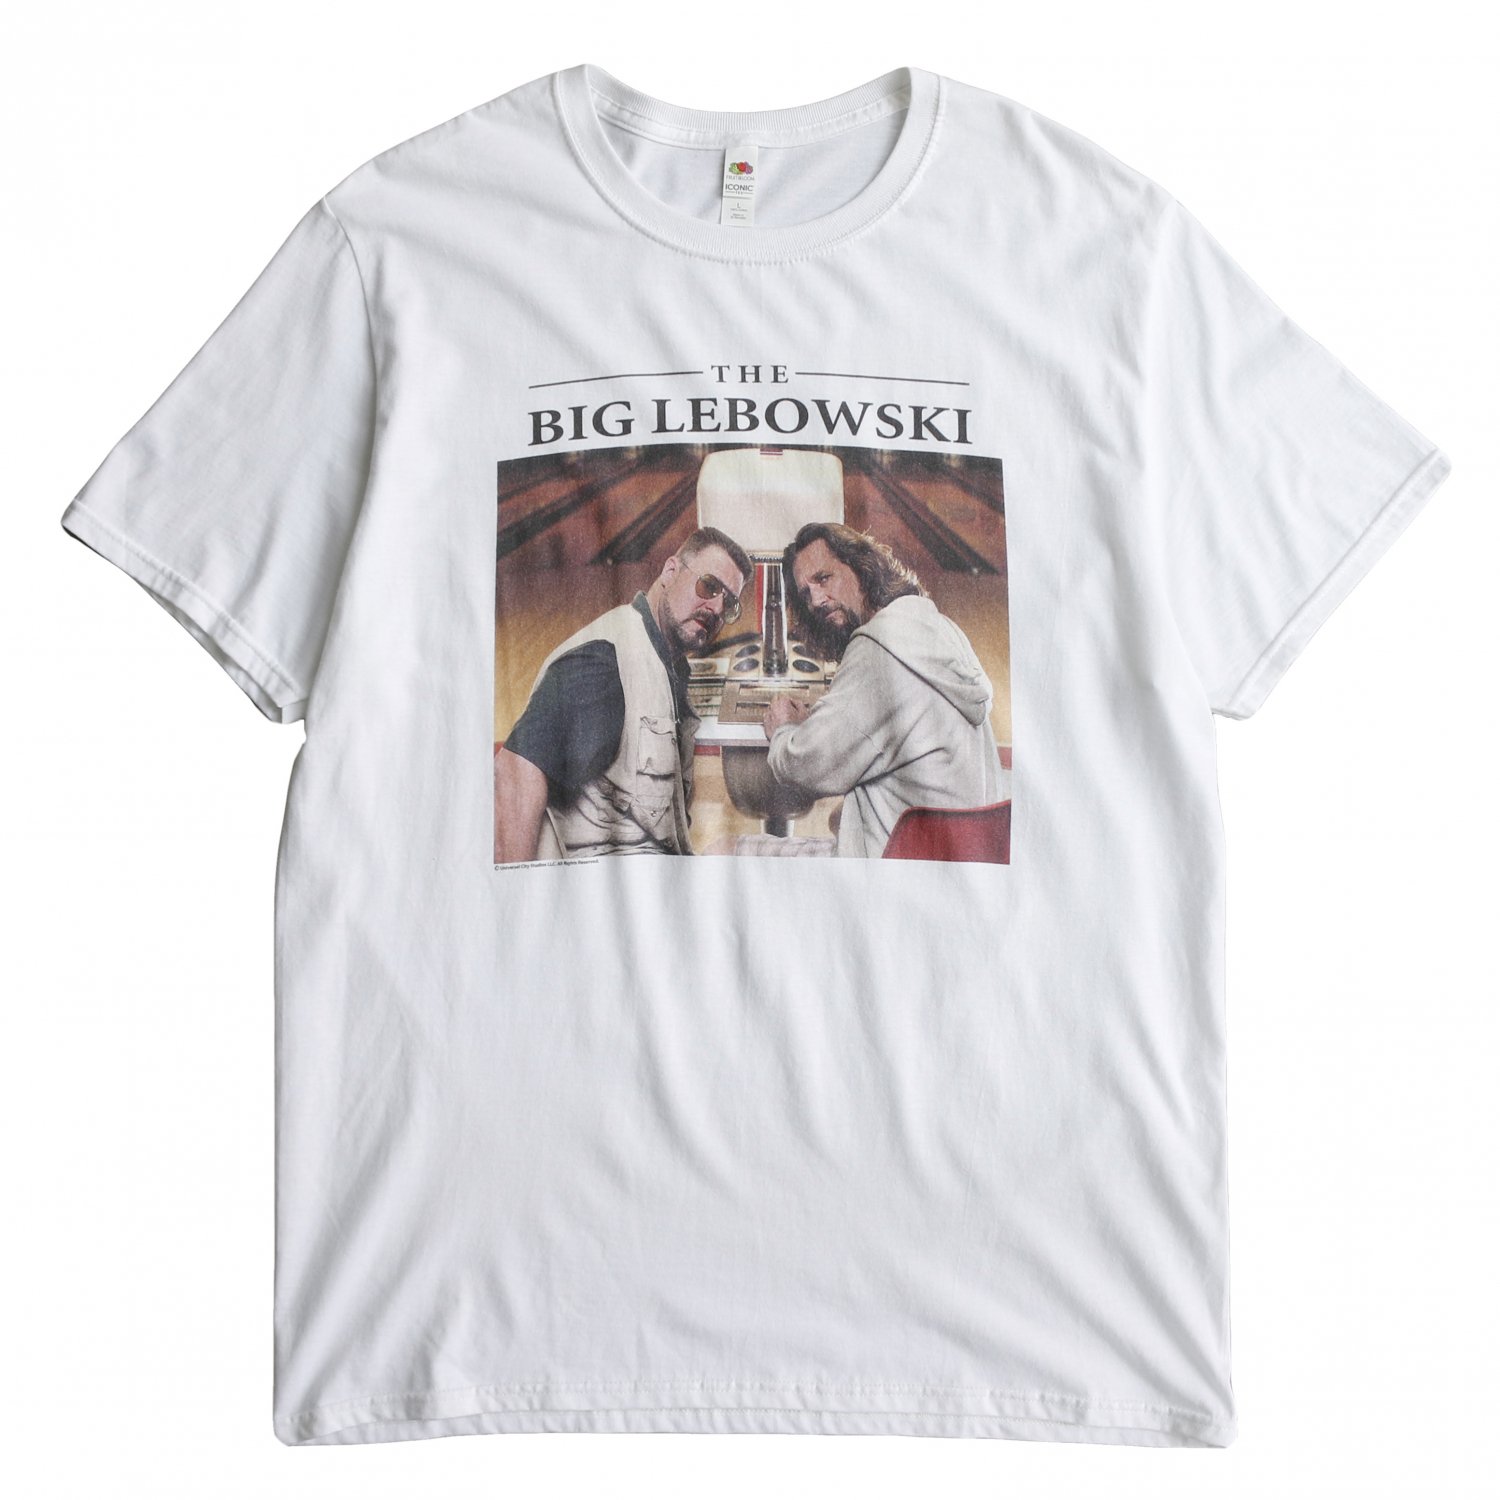 <img class='new_mark_img1' src='https://img.shop-pro.jp/img/new/icons8.gif' style='border:none;display:inline;margin:0px;padding:0px;width:auto;' />Movie Tee / S/S TEE THE BIG LEBOWSKI 